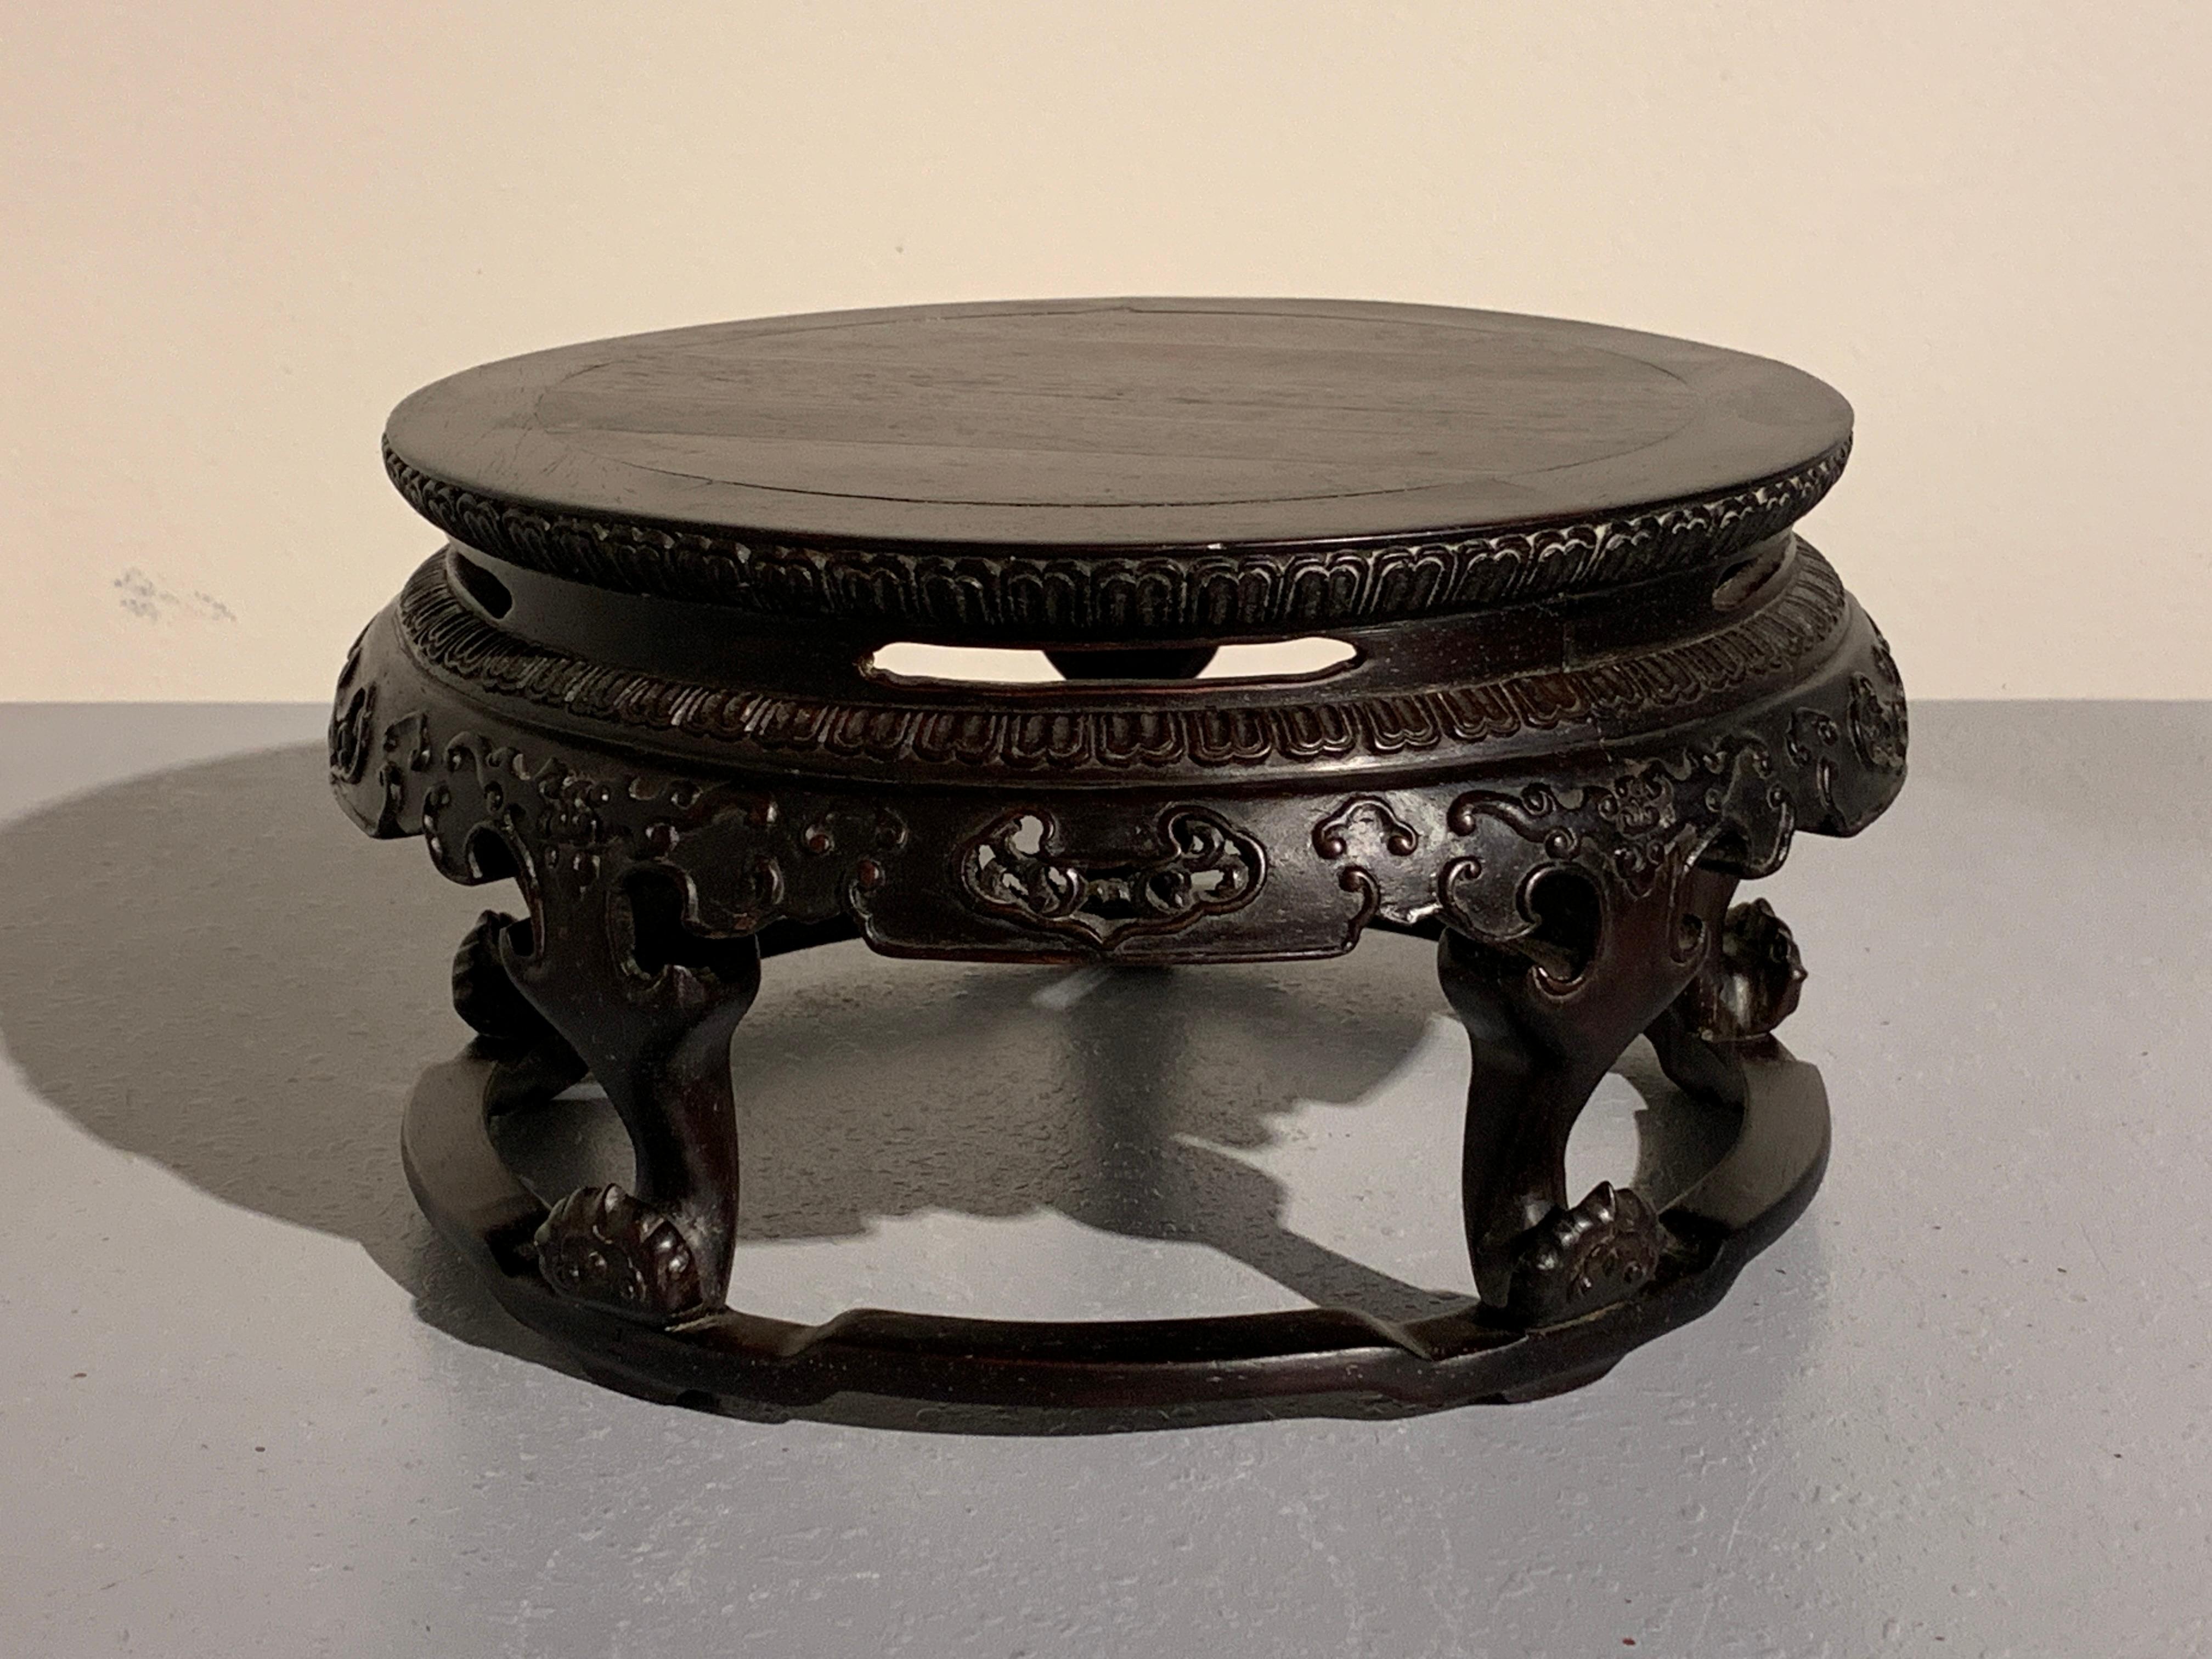 A finely carved zitan wood display stand in the form of a round table, China, Republic Period, mid 20th century. 

The circular display stand carved from rare and precious zitan wood. Fashioned as a classical Chinese round table, the stand is